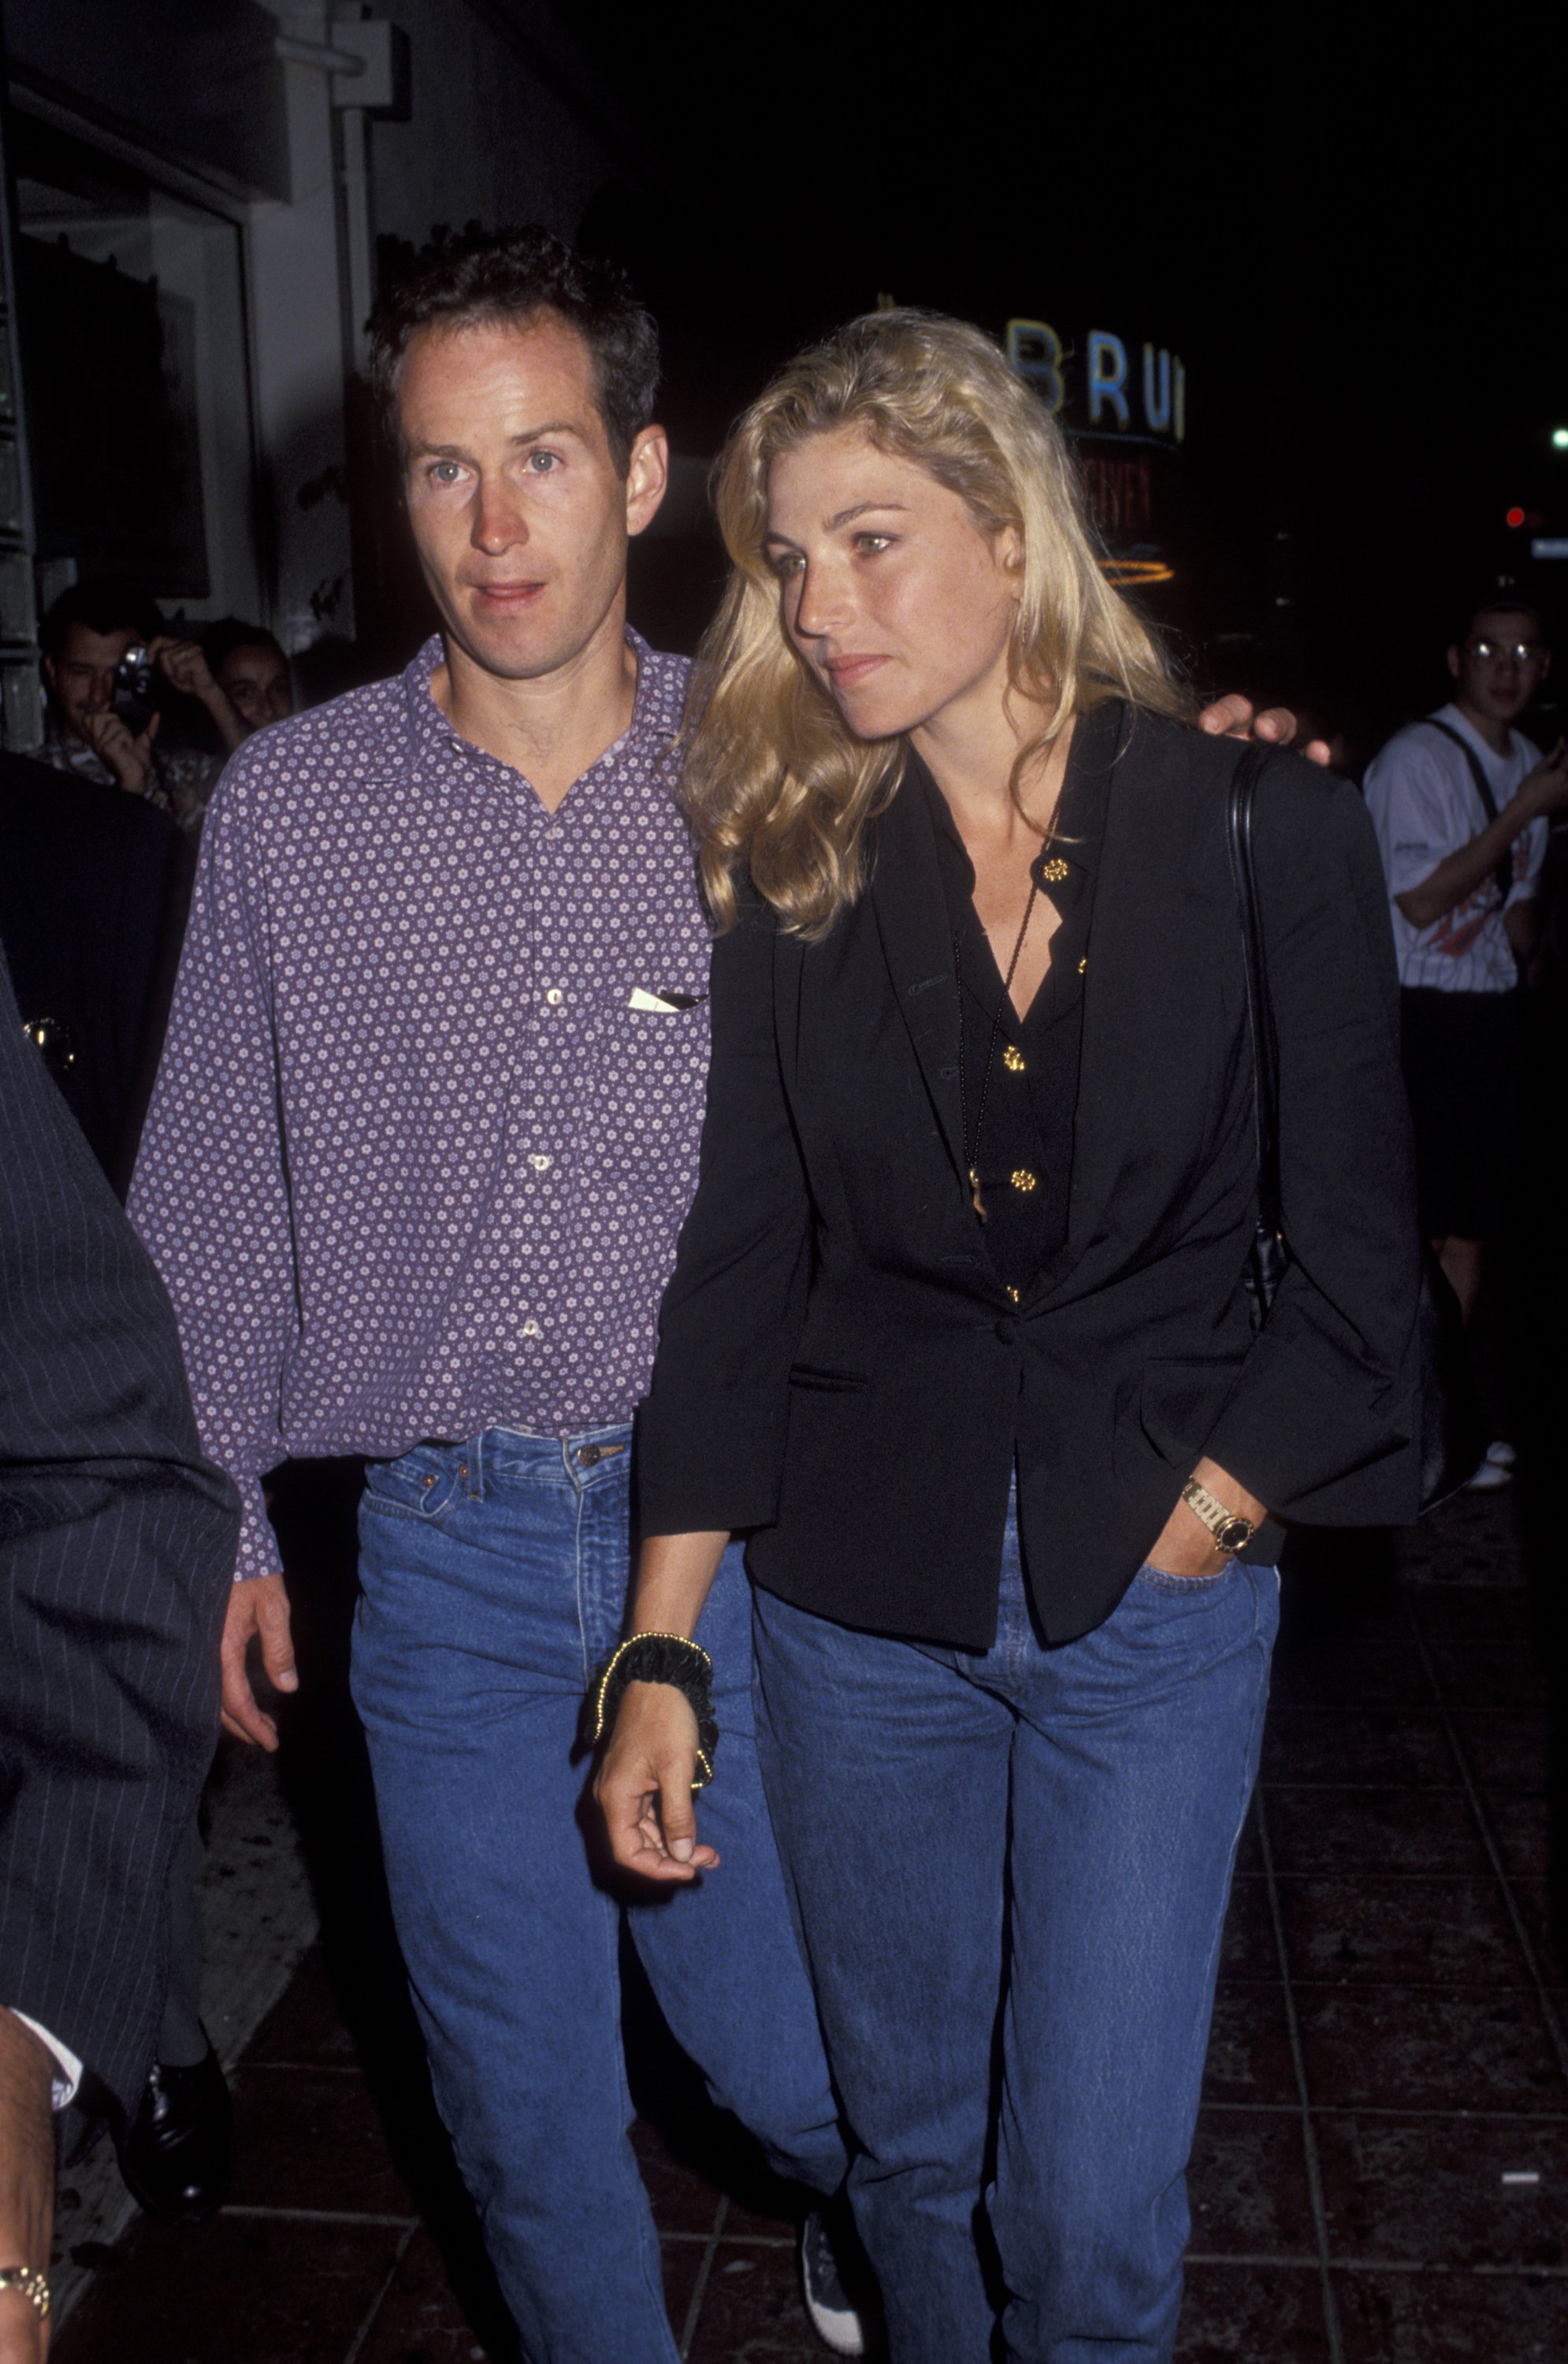 John McEnroe and Tatum O'Neal | Photo by Ron Galella, Ltd./Ron Galella Collection via Getty Images